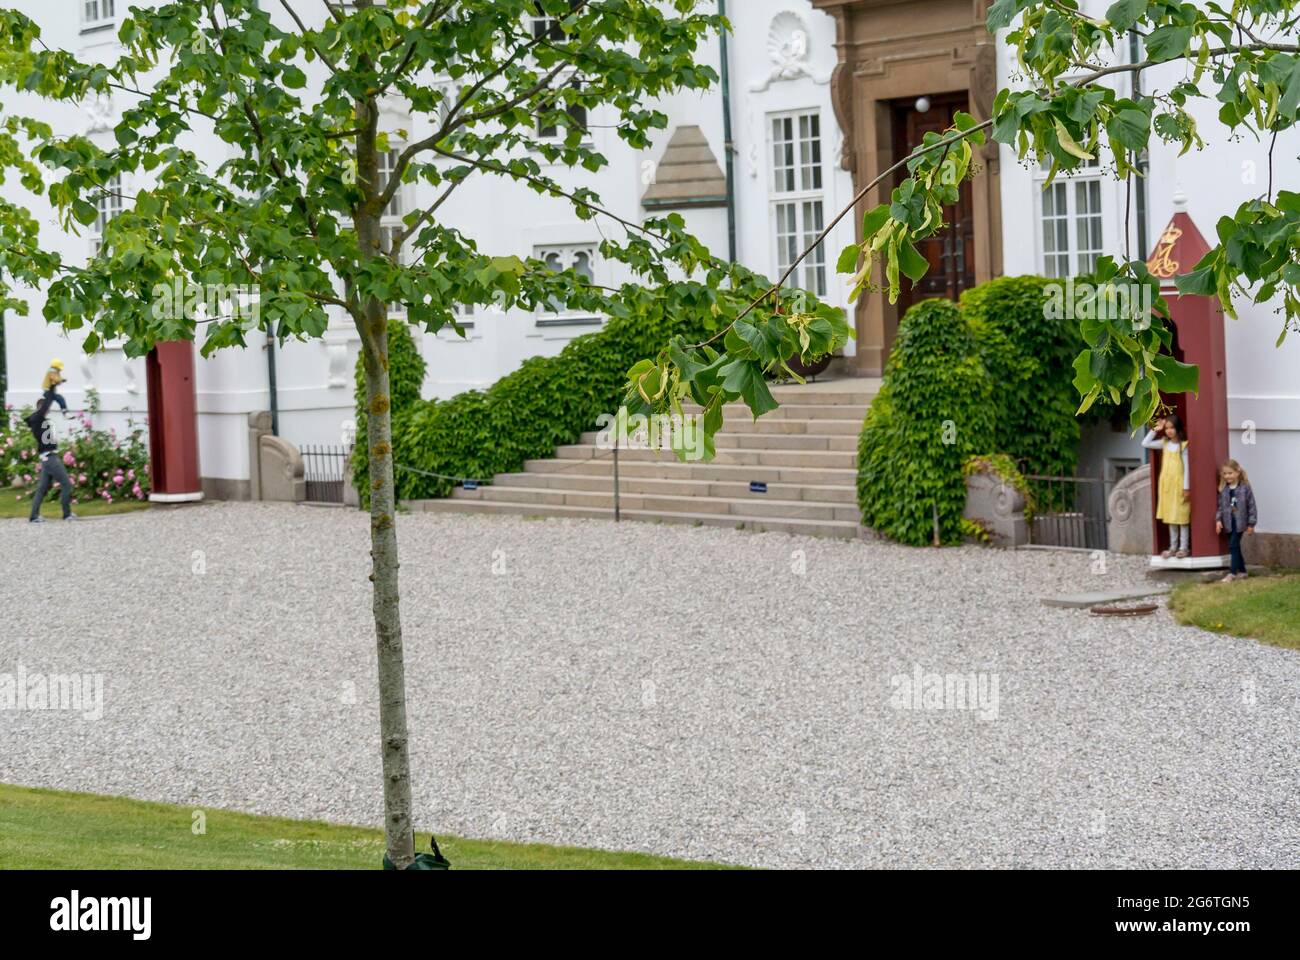 Aarhus, Denmark - 27 June 2021: The exterior of the Royal Marselisborg Palace, People visit the garden around the castle Stock Photo